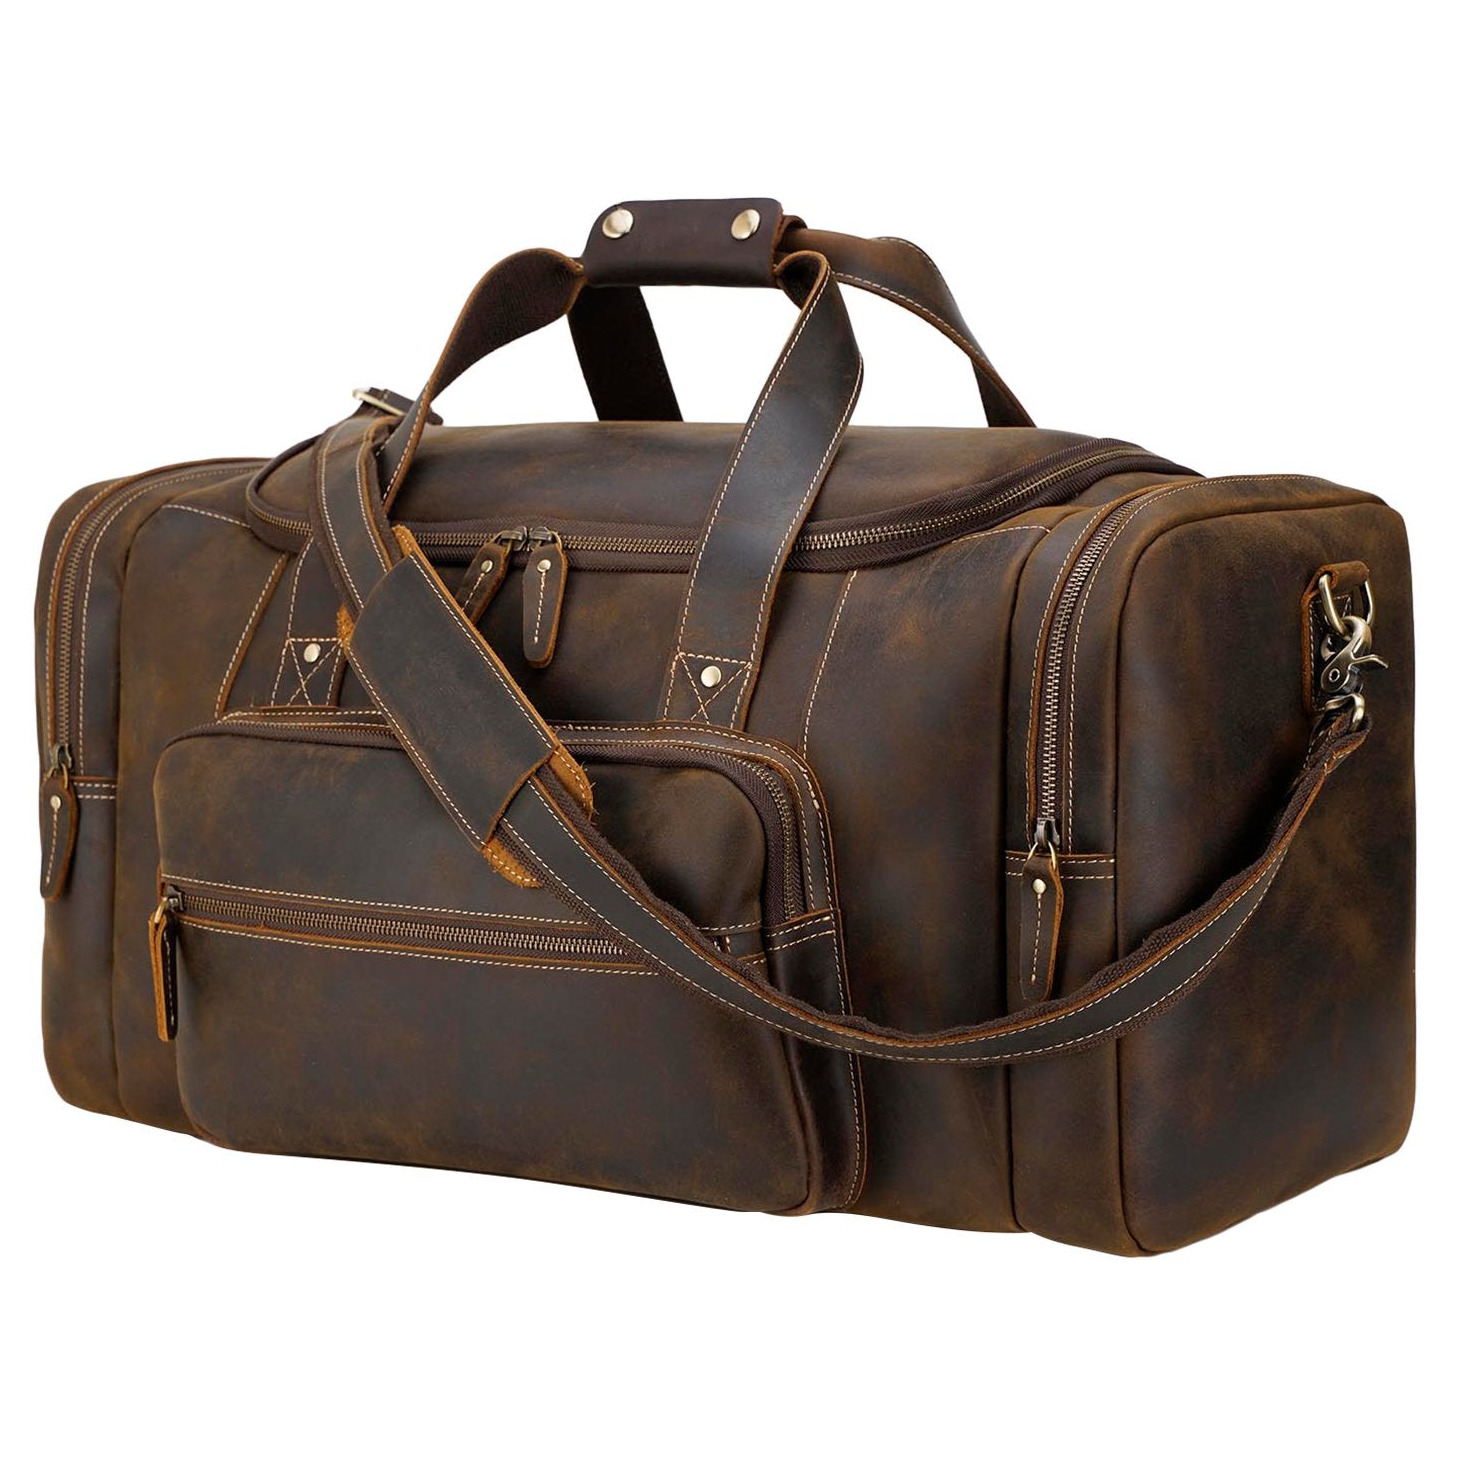 Leather Large 32 inch duffel bags for men holdall leather travel bag o